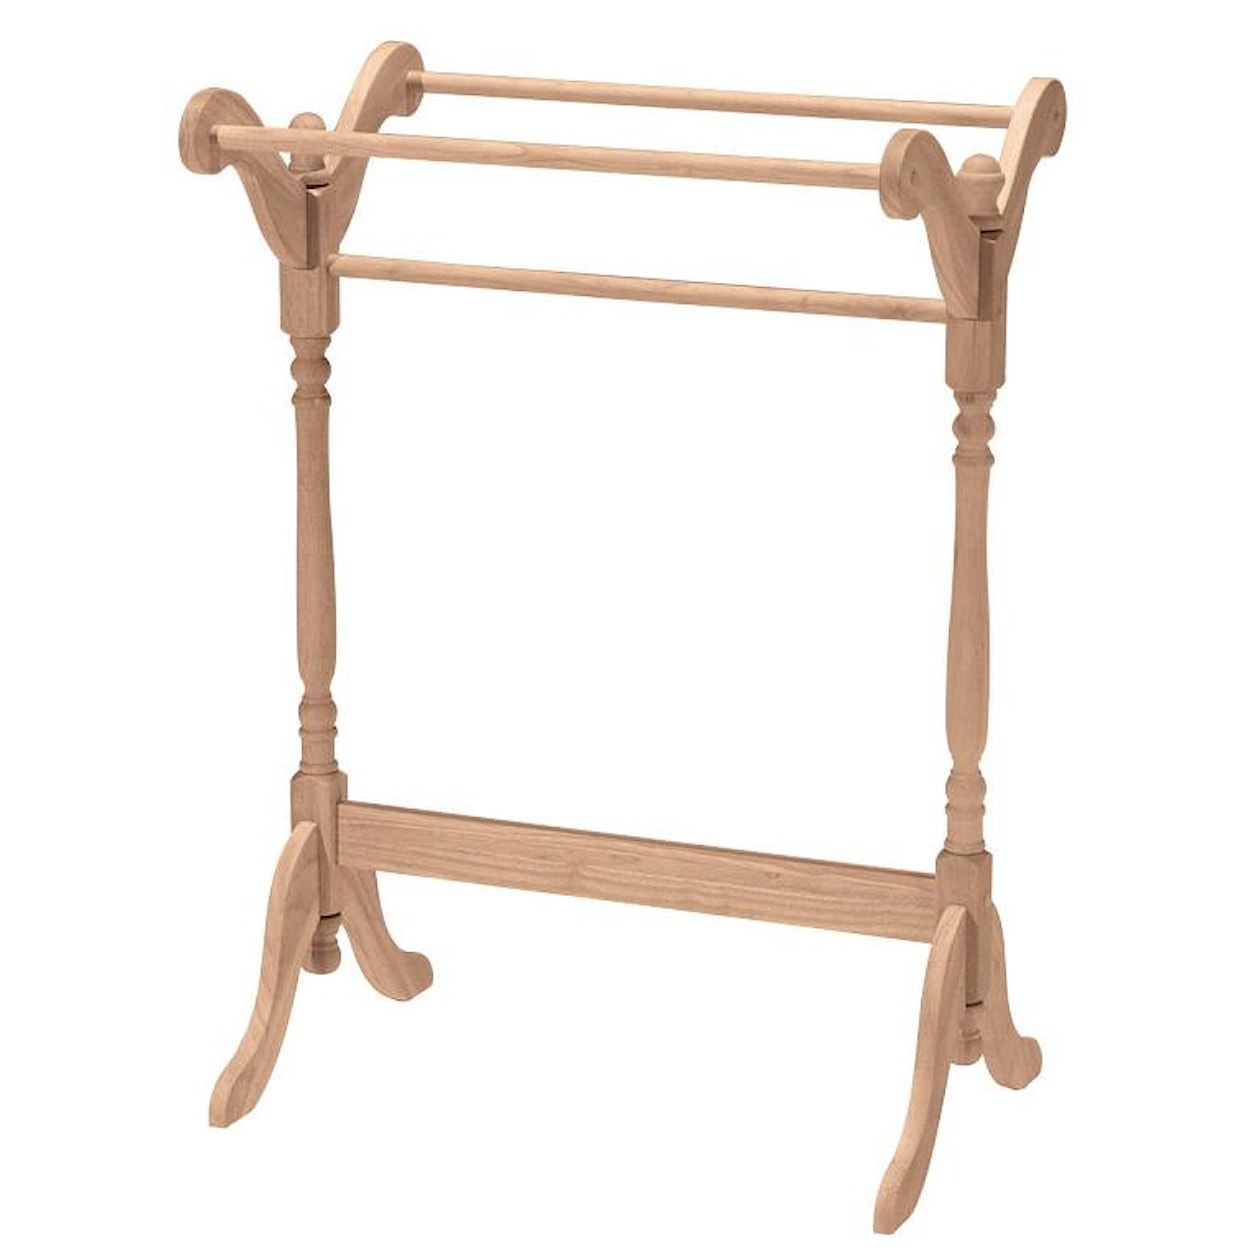 John Thomas SELECT Occasional & Accents Quilt Rack